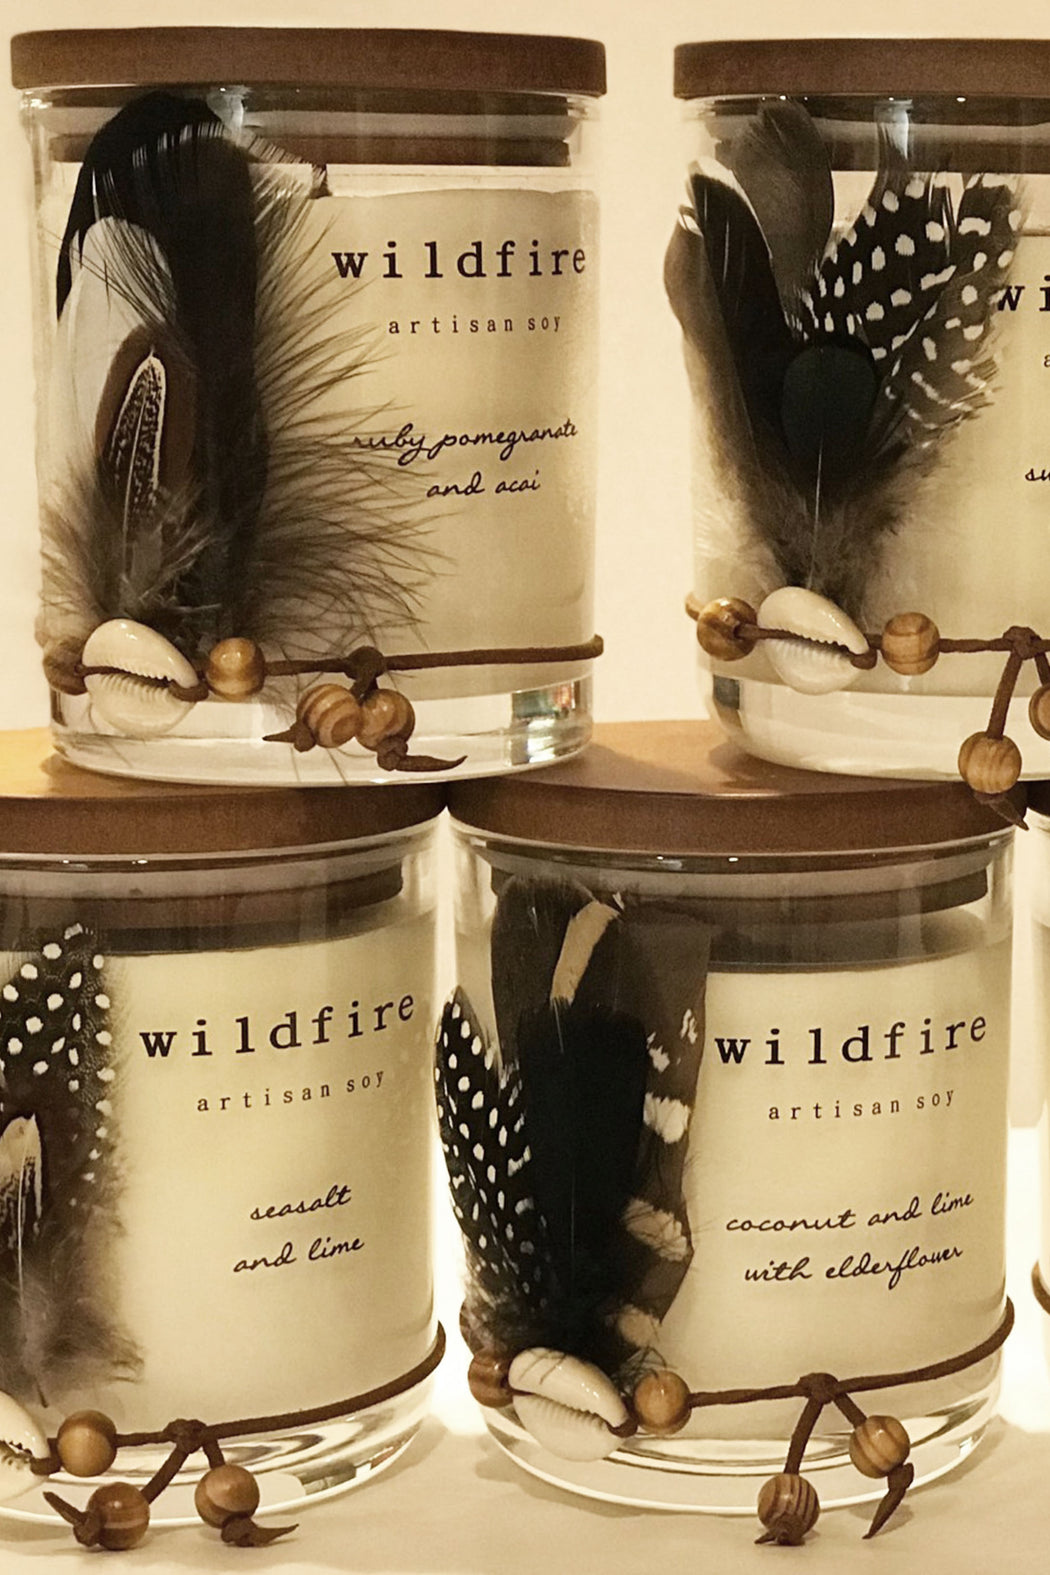 Wildfire-Native Mint and bergamot Candle-Mott and Mulberry